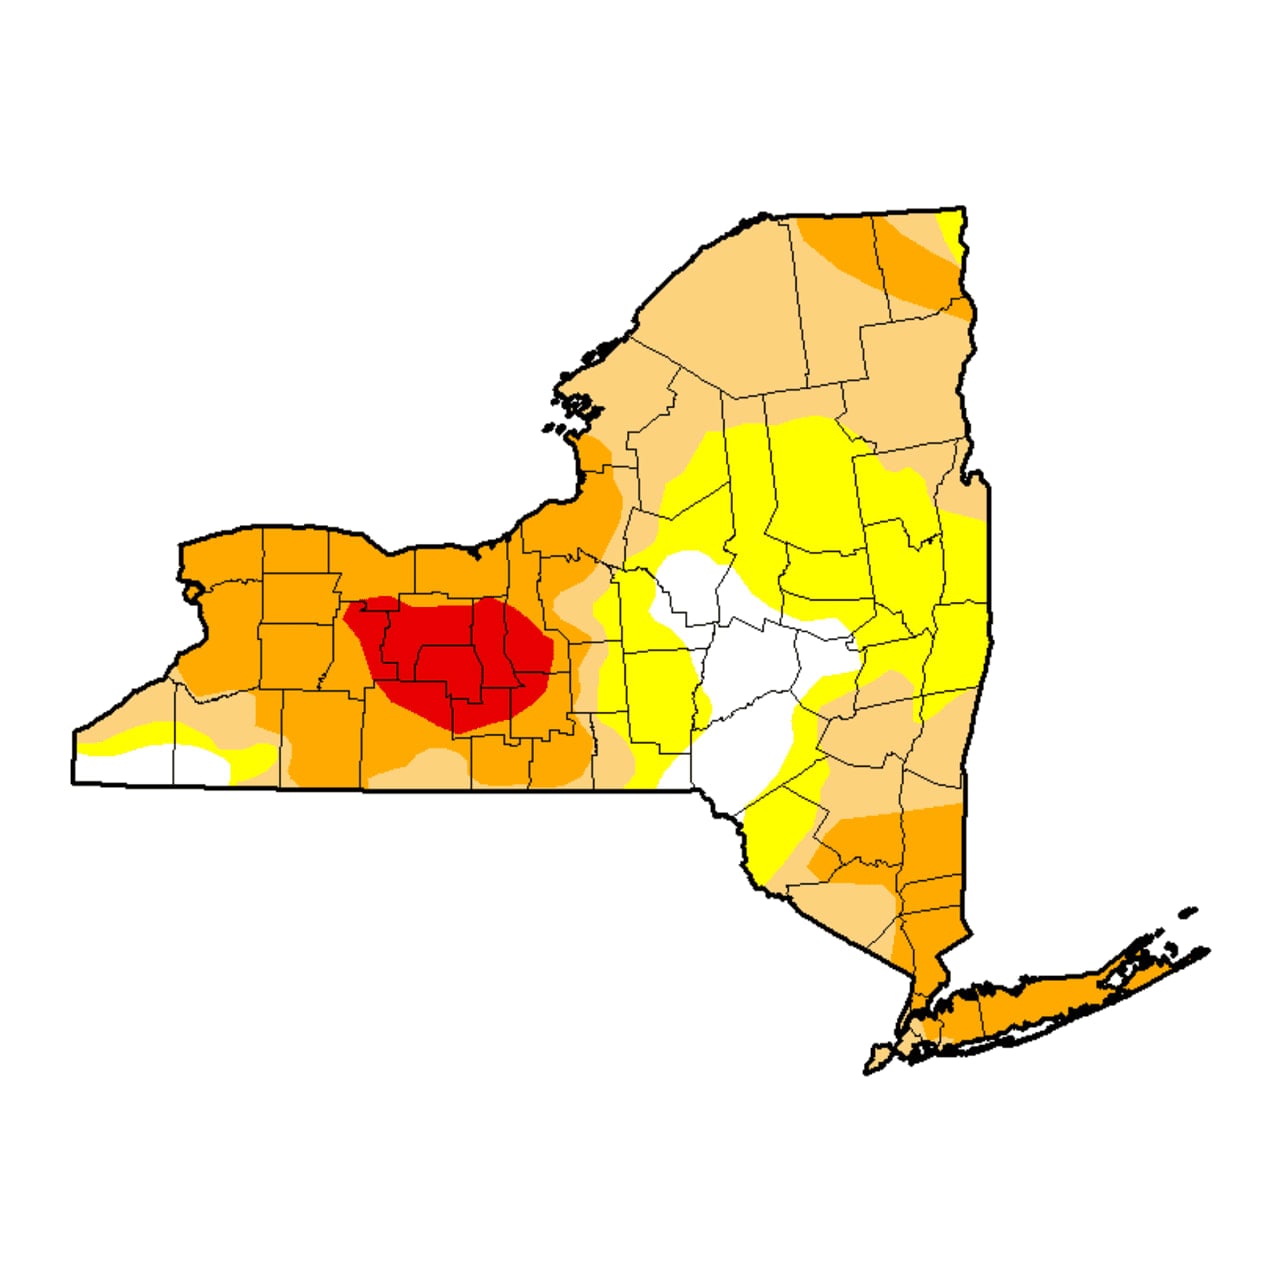 Much of the New York area remains under severe drought conditions (indicated by orange in the map above).